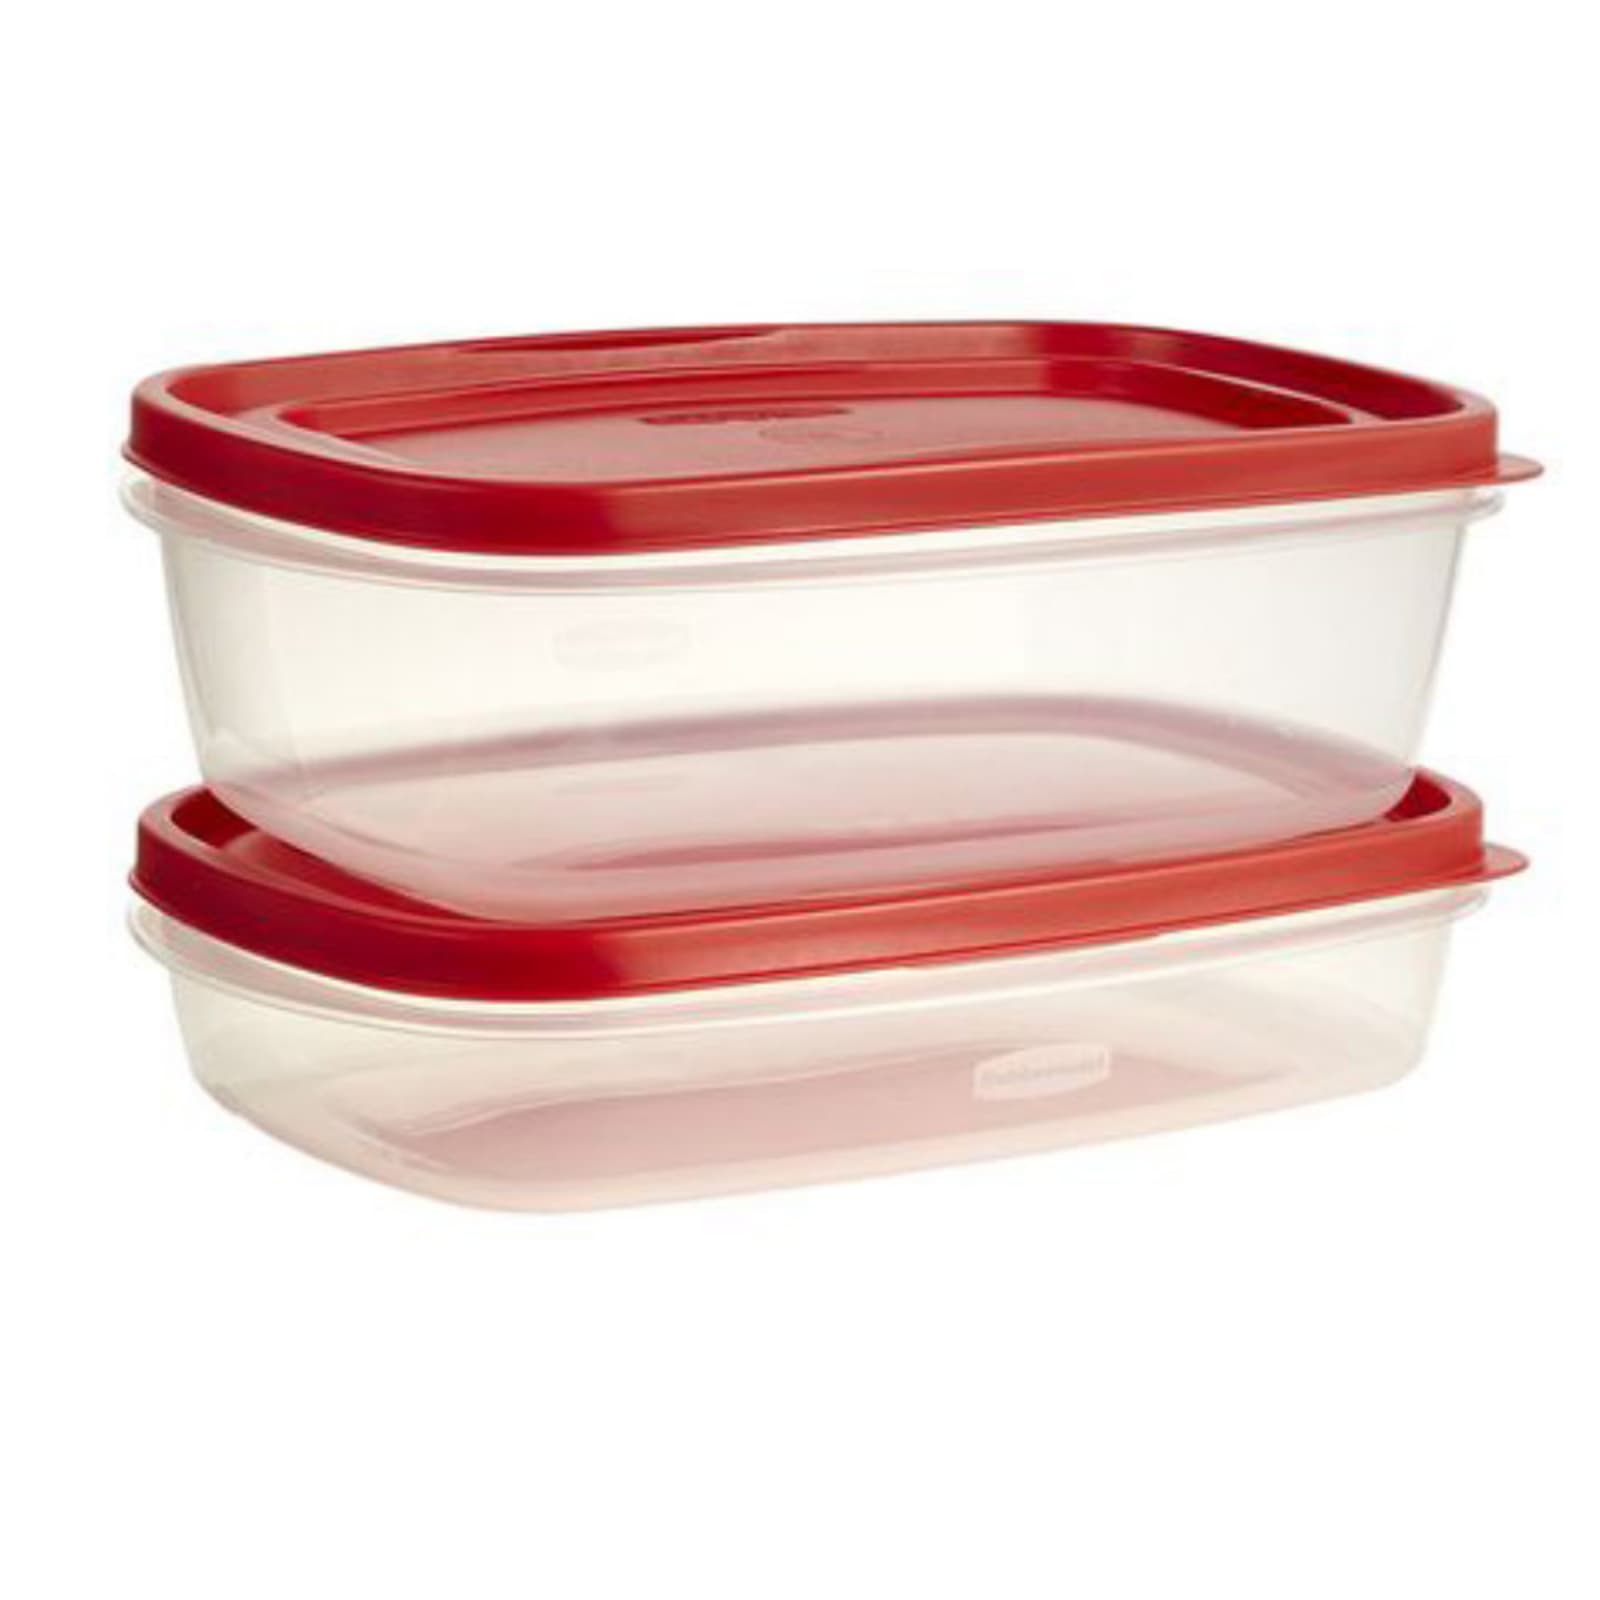 These Rubbermaid EasyFindLids Meal Prep Containers are on sale